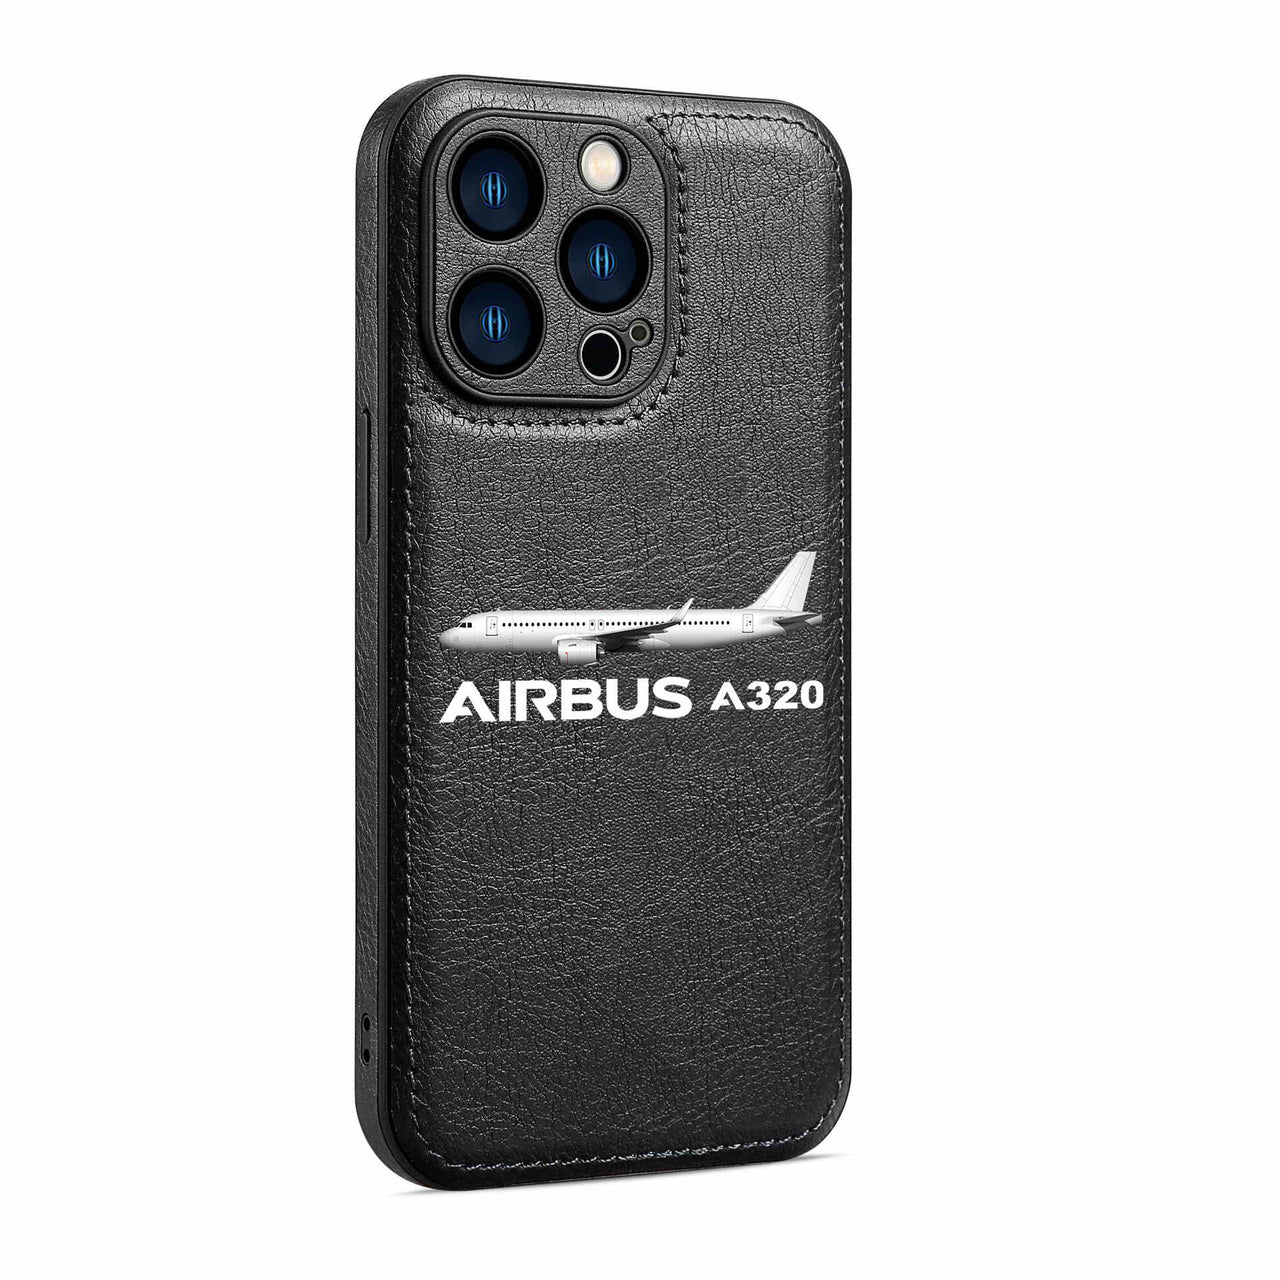 The Airbus A320 Designed Leather iPhone Cases